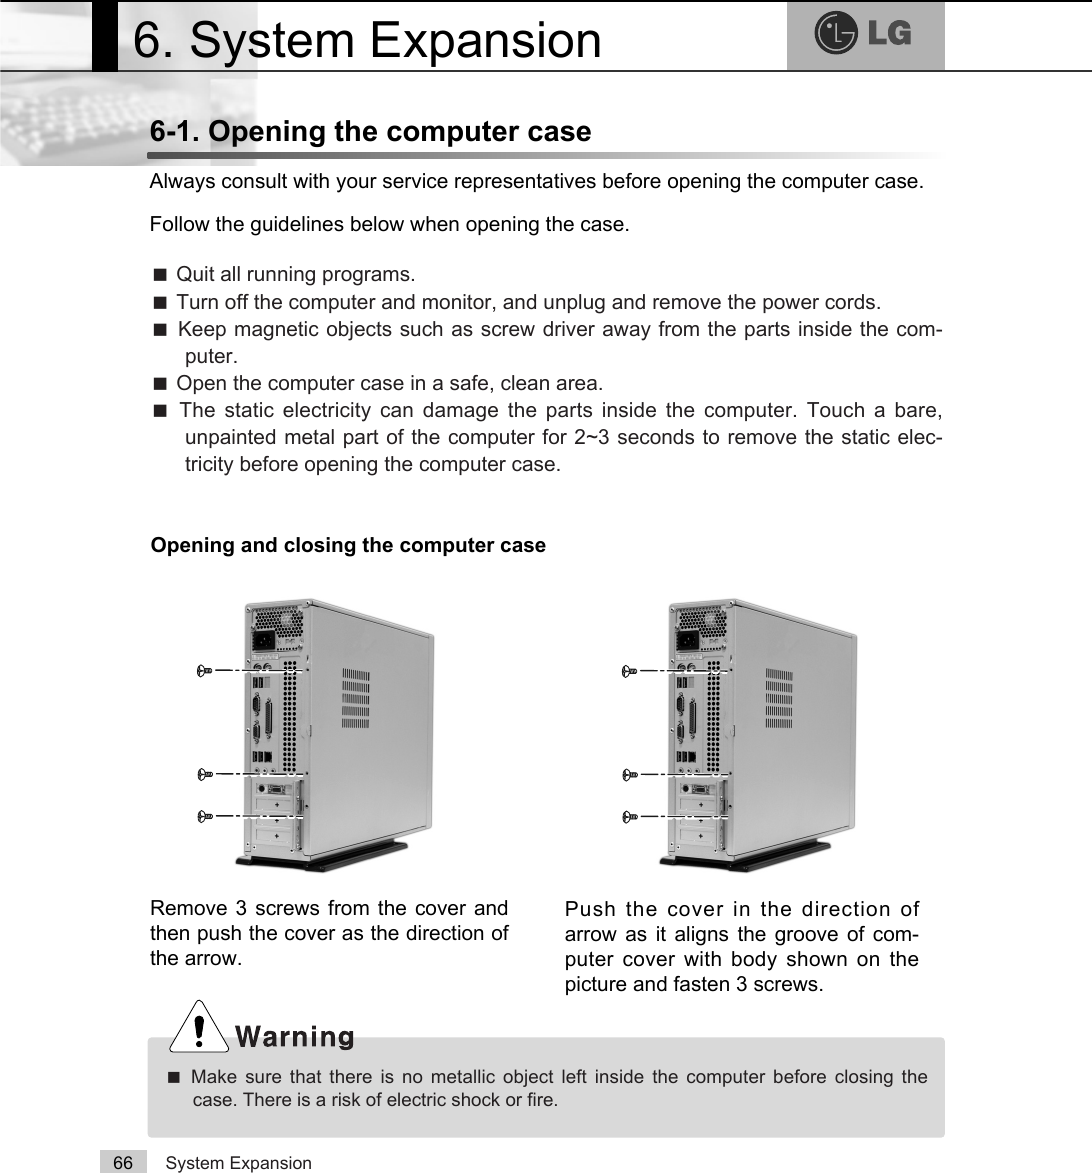 System Expansion666-1. Opening the computer caseAlways consult with your service representatives before opening the computer case.Follow the guidelines below when opening the case.ãQuit all running programs.ãTurn off the computer and monitor, and unplug and remove the power cords.ãKeep magnetic objects such as screw driver away from the parts inside the com-puter.ãOpen the computer case in a safe, clean area.ãThe static electricity can damage the parts inside the computer. Touch a bare,unpainted metal part of the computer for 2~3 seconds to remove the static elec-tricity before opening the computer case.ãMake sure that there is no metallic object left inside the computer before closing thecase. There is a risk of electric shock or fire.6. System ExpansionOpening and closing the computer caseRemove 3 screws from the cover andthen push the cover as the direction ofthe arrow.Push the cover in the direction ofarrow as it aligns the groove of com-puter cover with body shown on thepicture and fasten 3 screws.